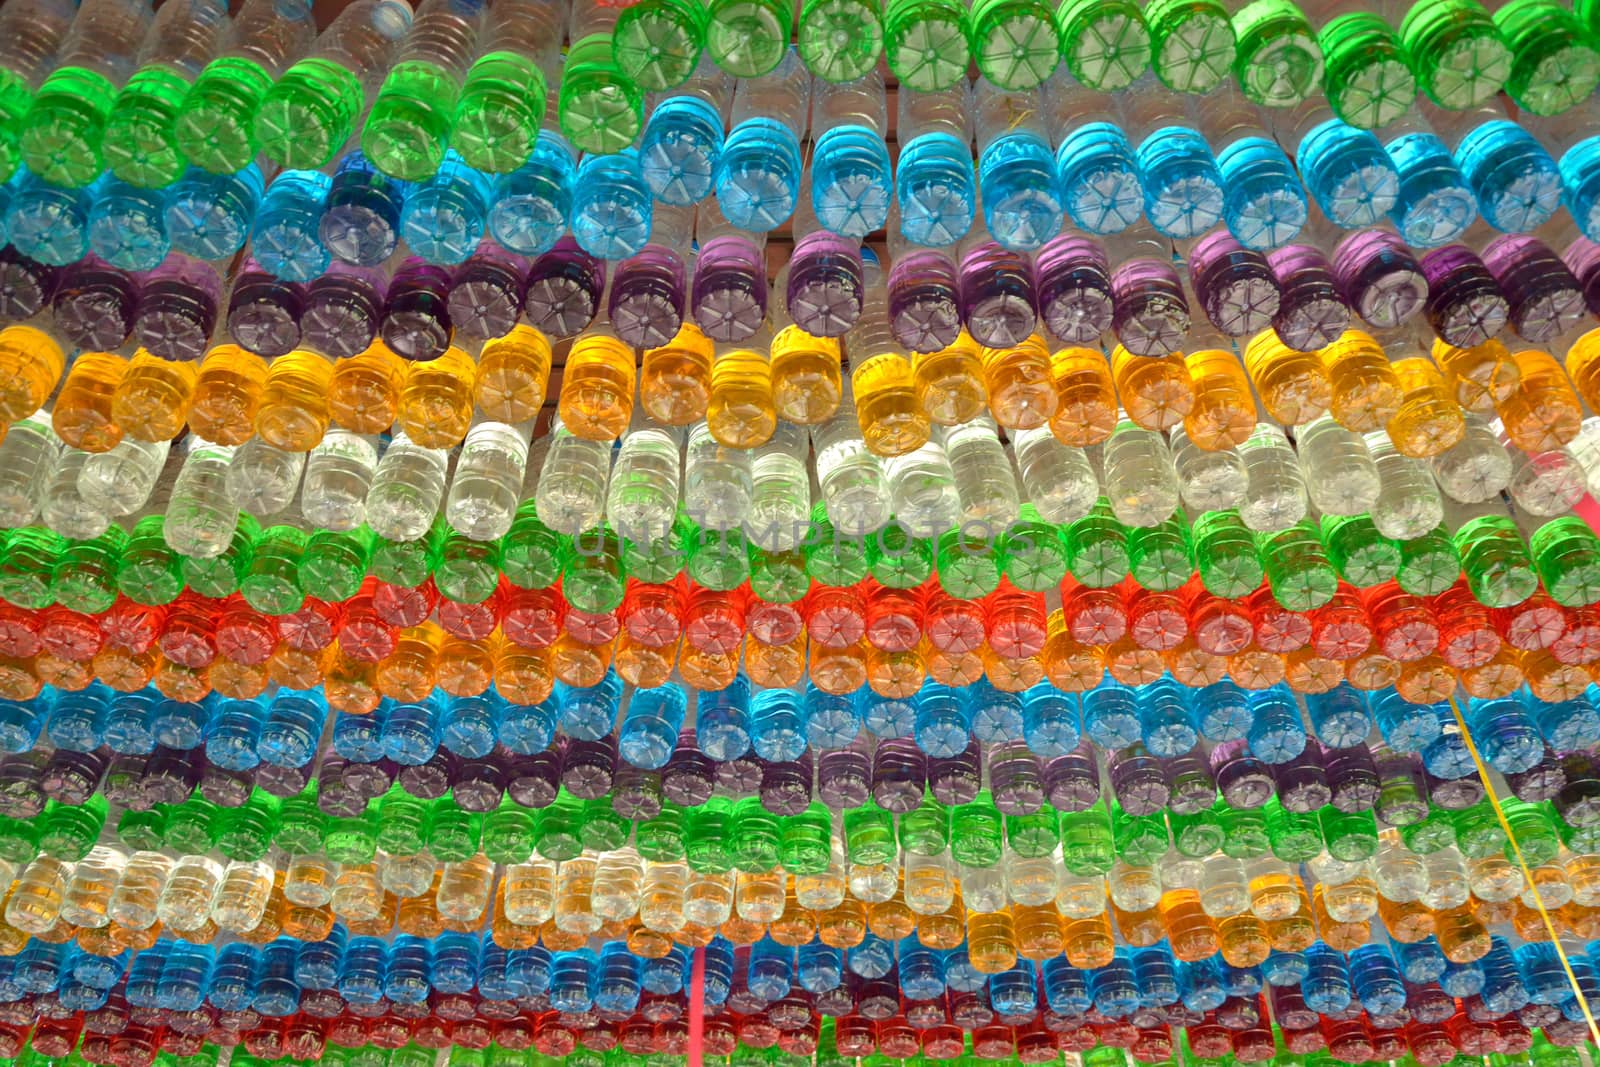 used plastic colorful bottles decorated by think4photop